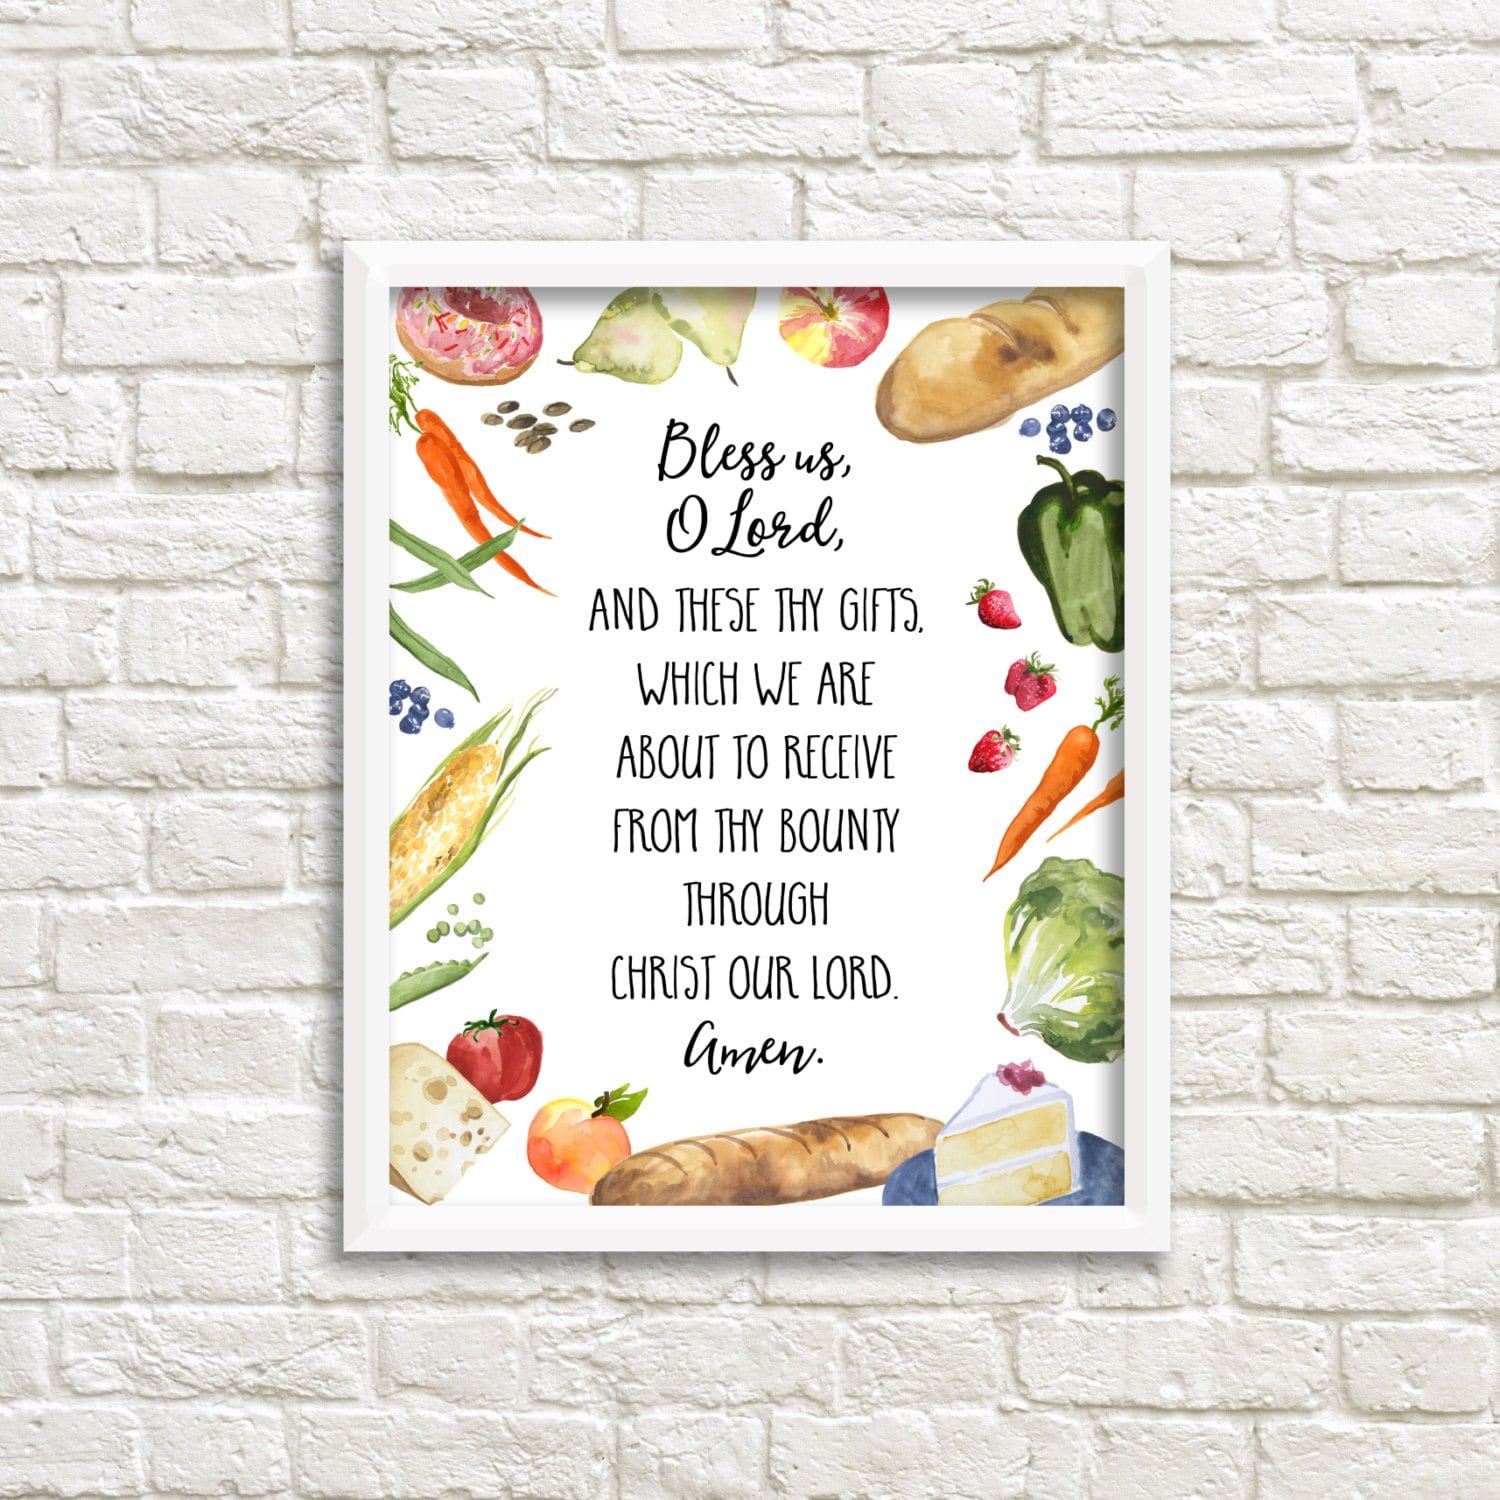 grace-before-meals-bless-us-o-lord-prayer-8x10-printable-wall